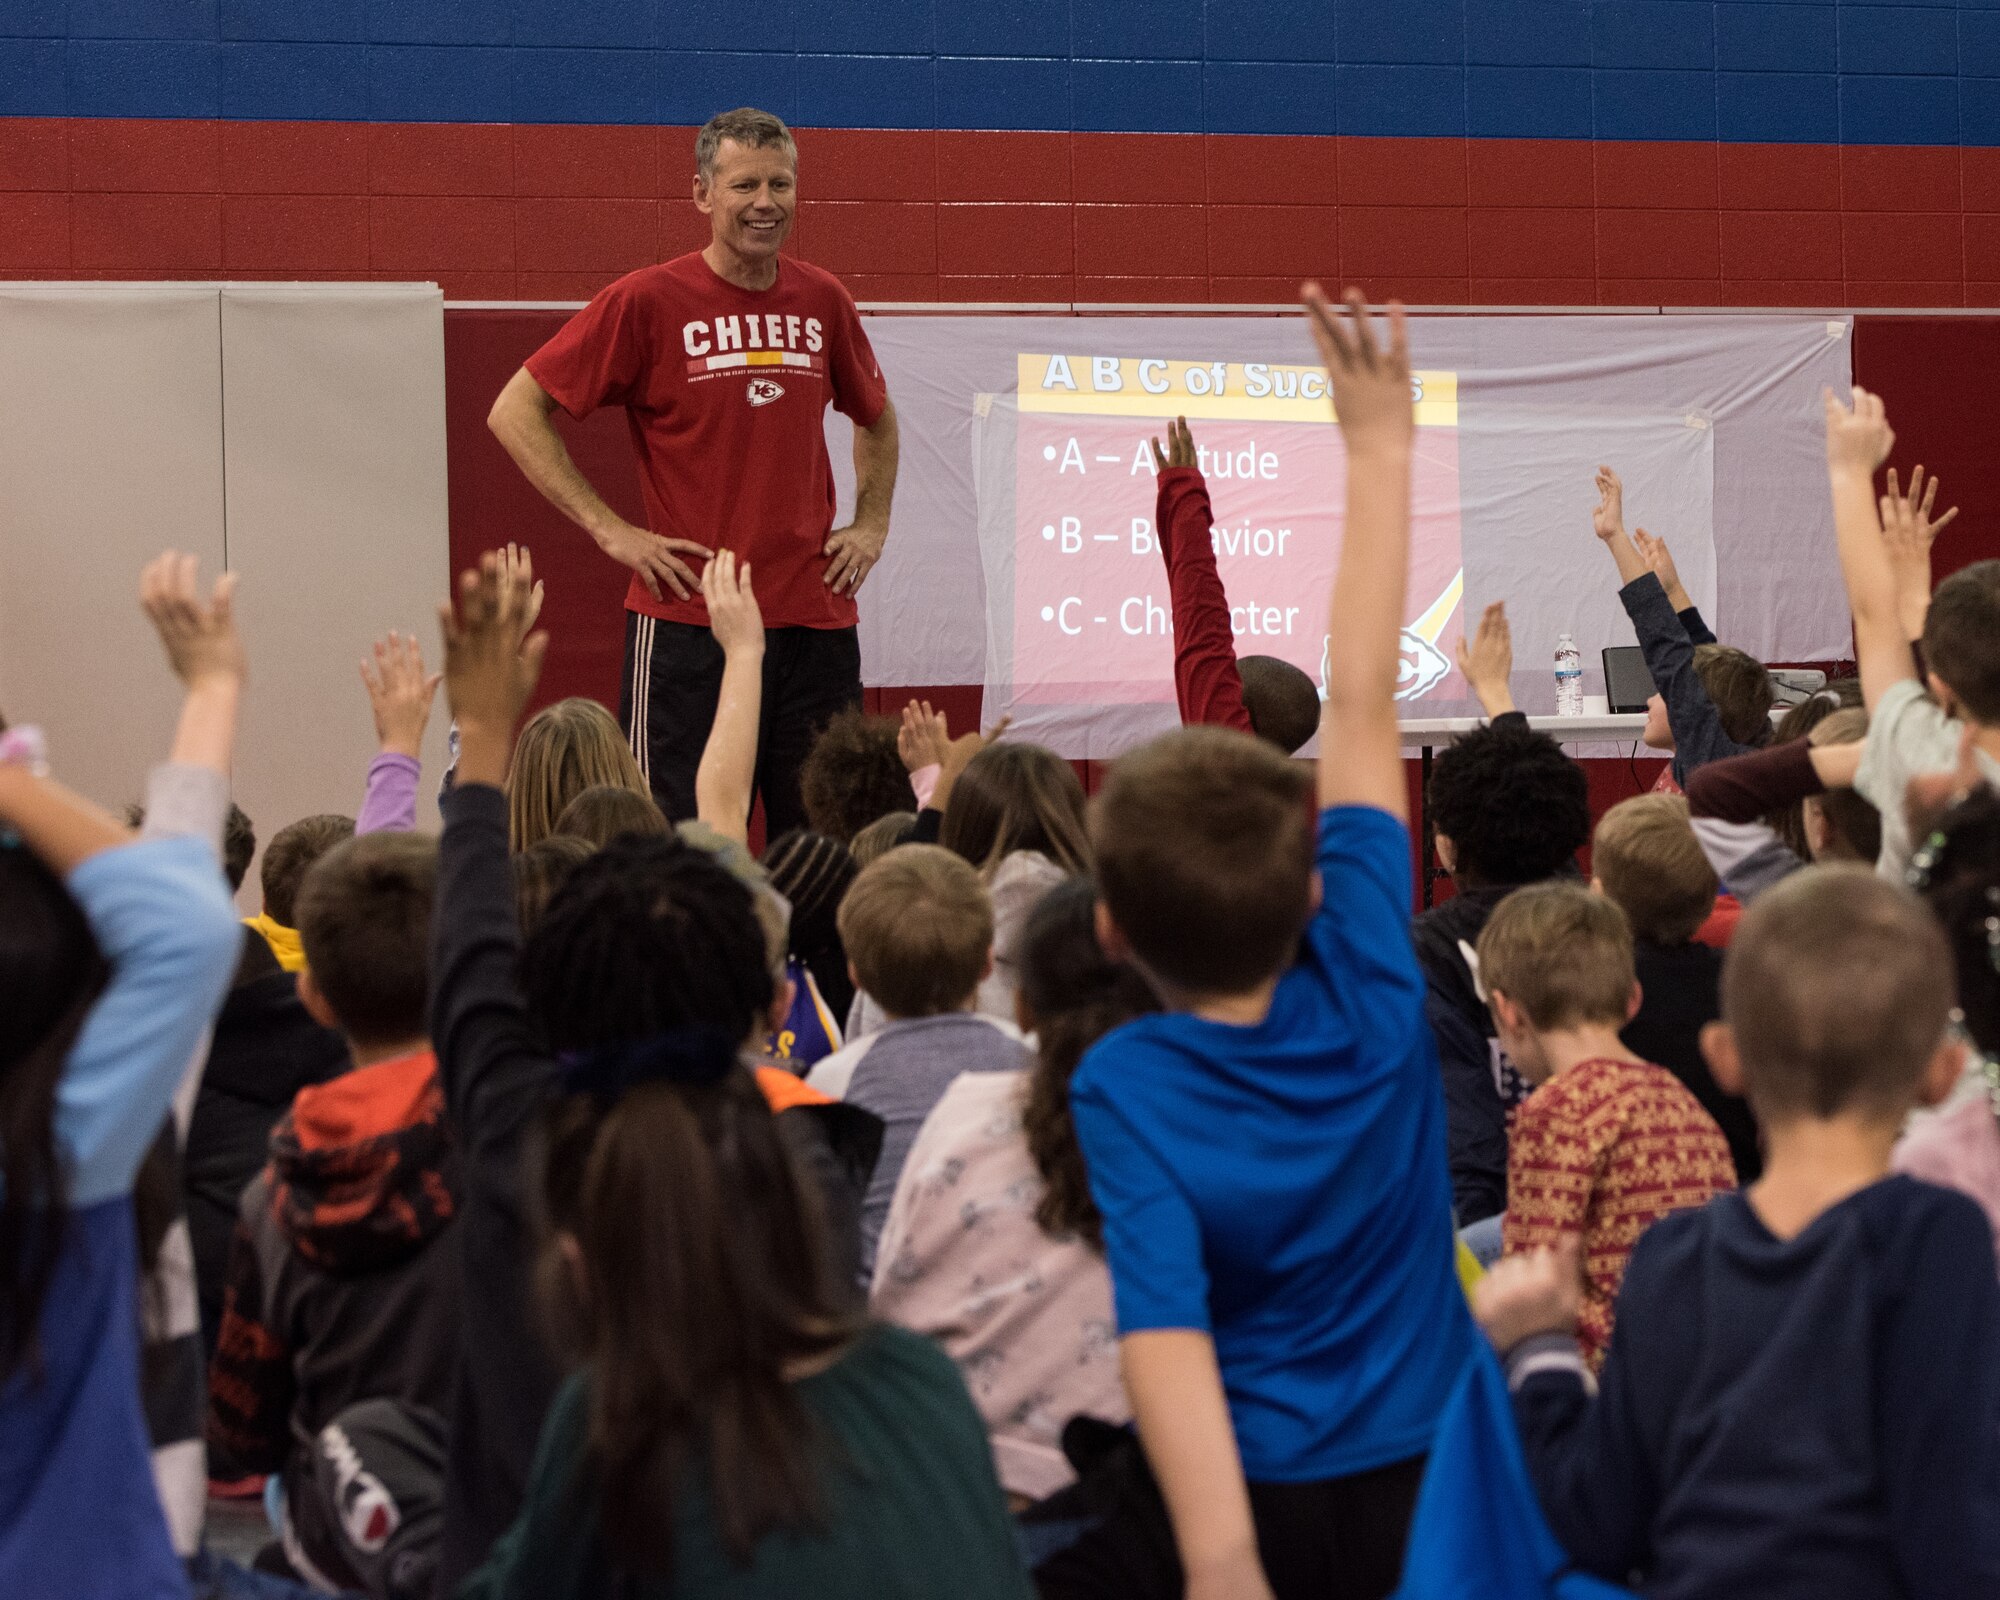 Dan Meers, the Kansas City Chiefs NFL team mascot KC Wolf, visited the Youth Center at Whiteman Air Force Base, Missouri, Dec. 18, 2019. Meers talked to the children about the importance of your attitude, behavior and character and answered questions about what life is like as a mascot as part of an outreach to positively influence their overall well-being and promote resiliency. (U.S. Air Force photo by Airman 1st Class Christina Carter)